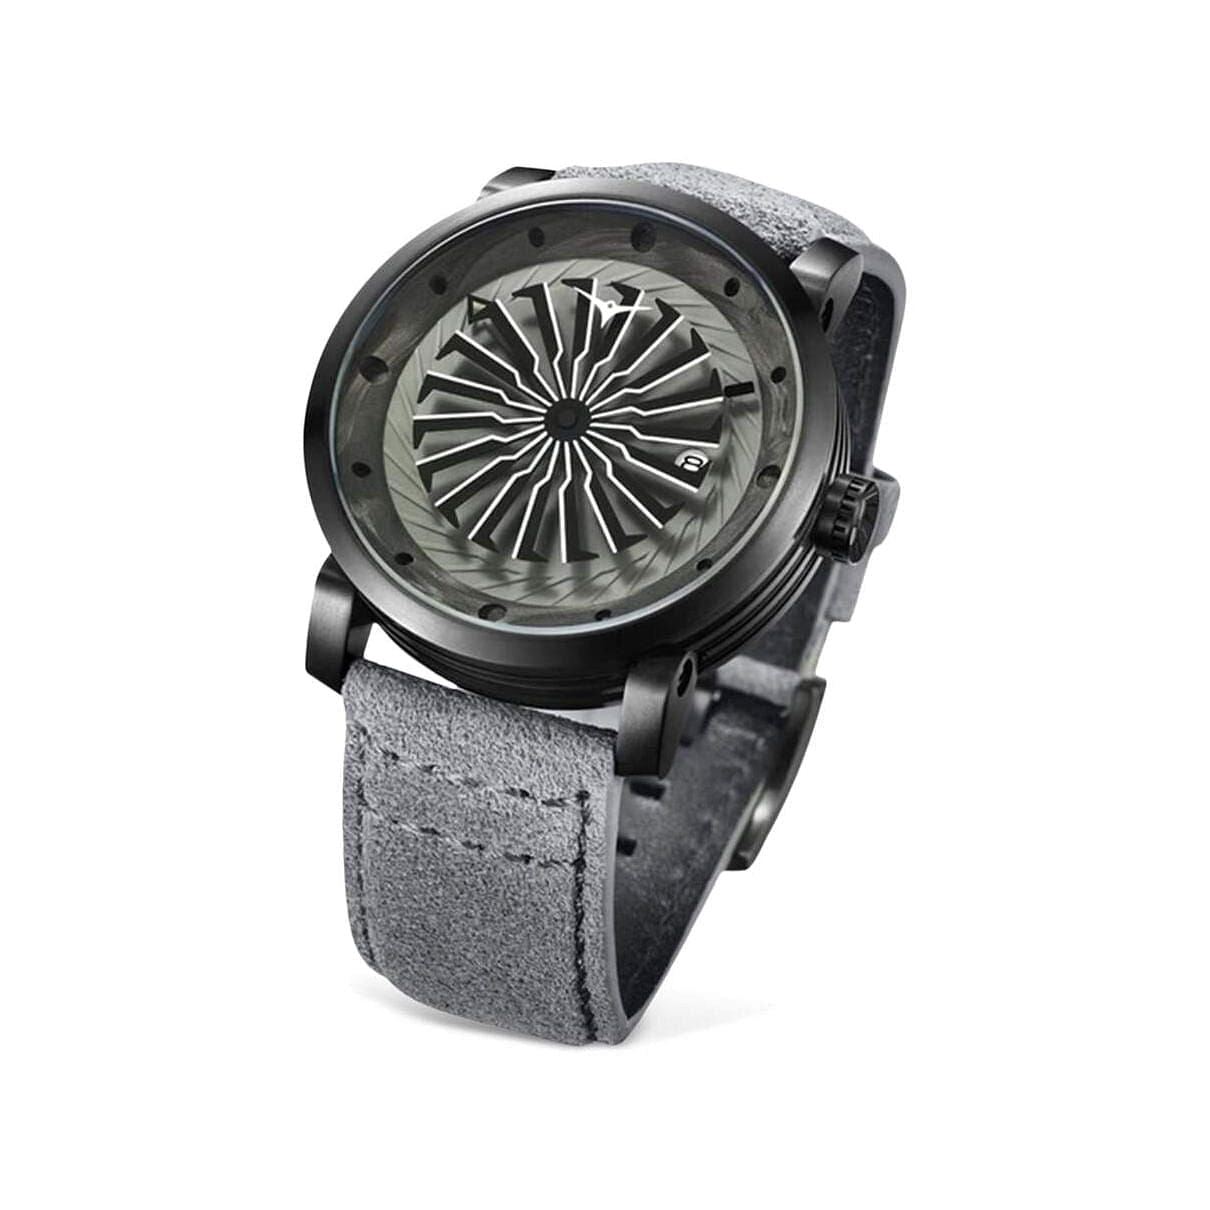 Zinvo Blade Ghost Gray 44 MM Automatic Men